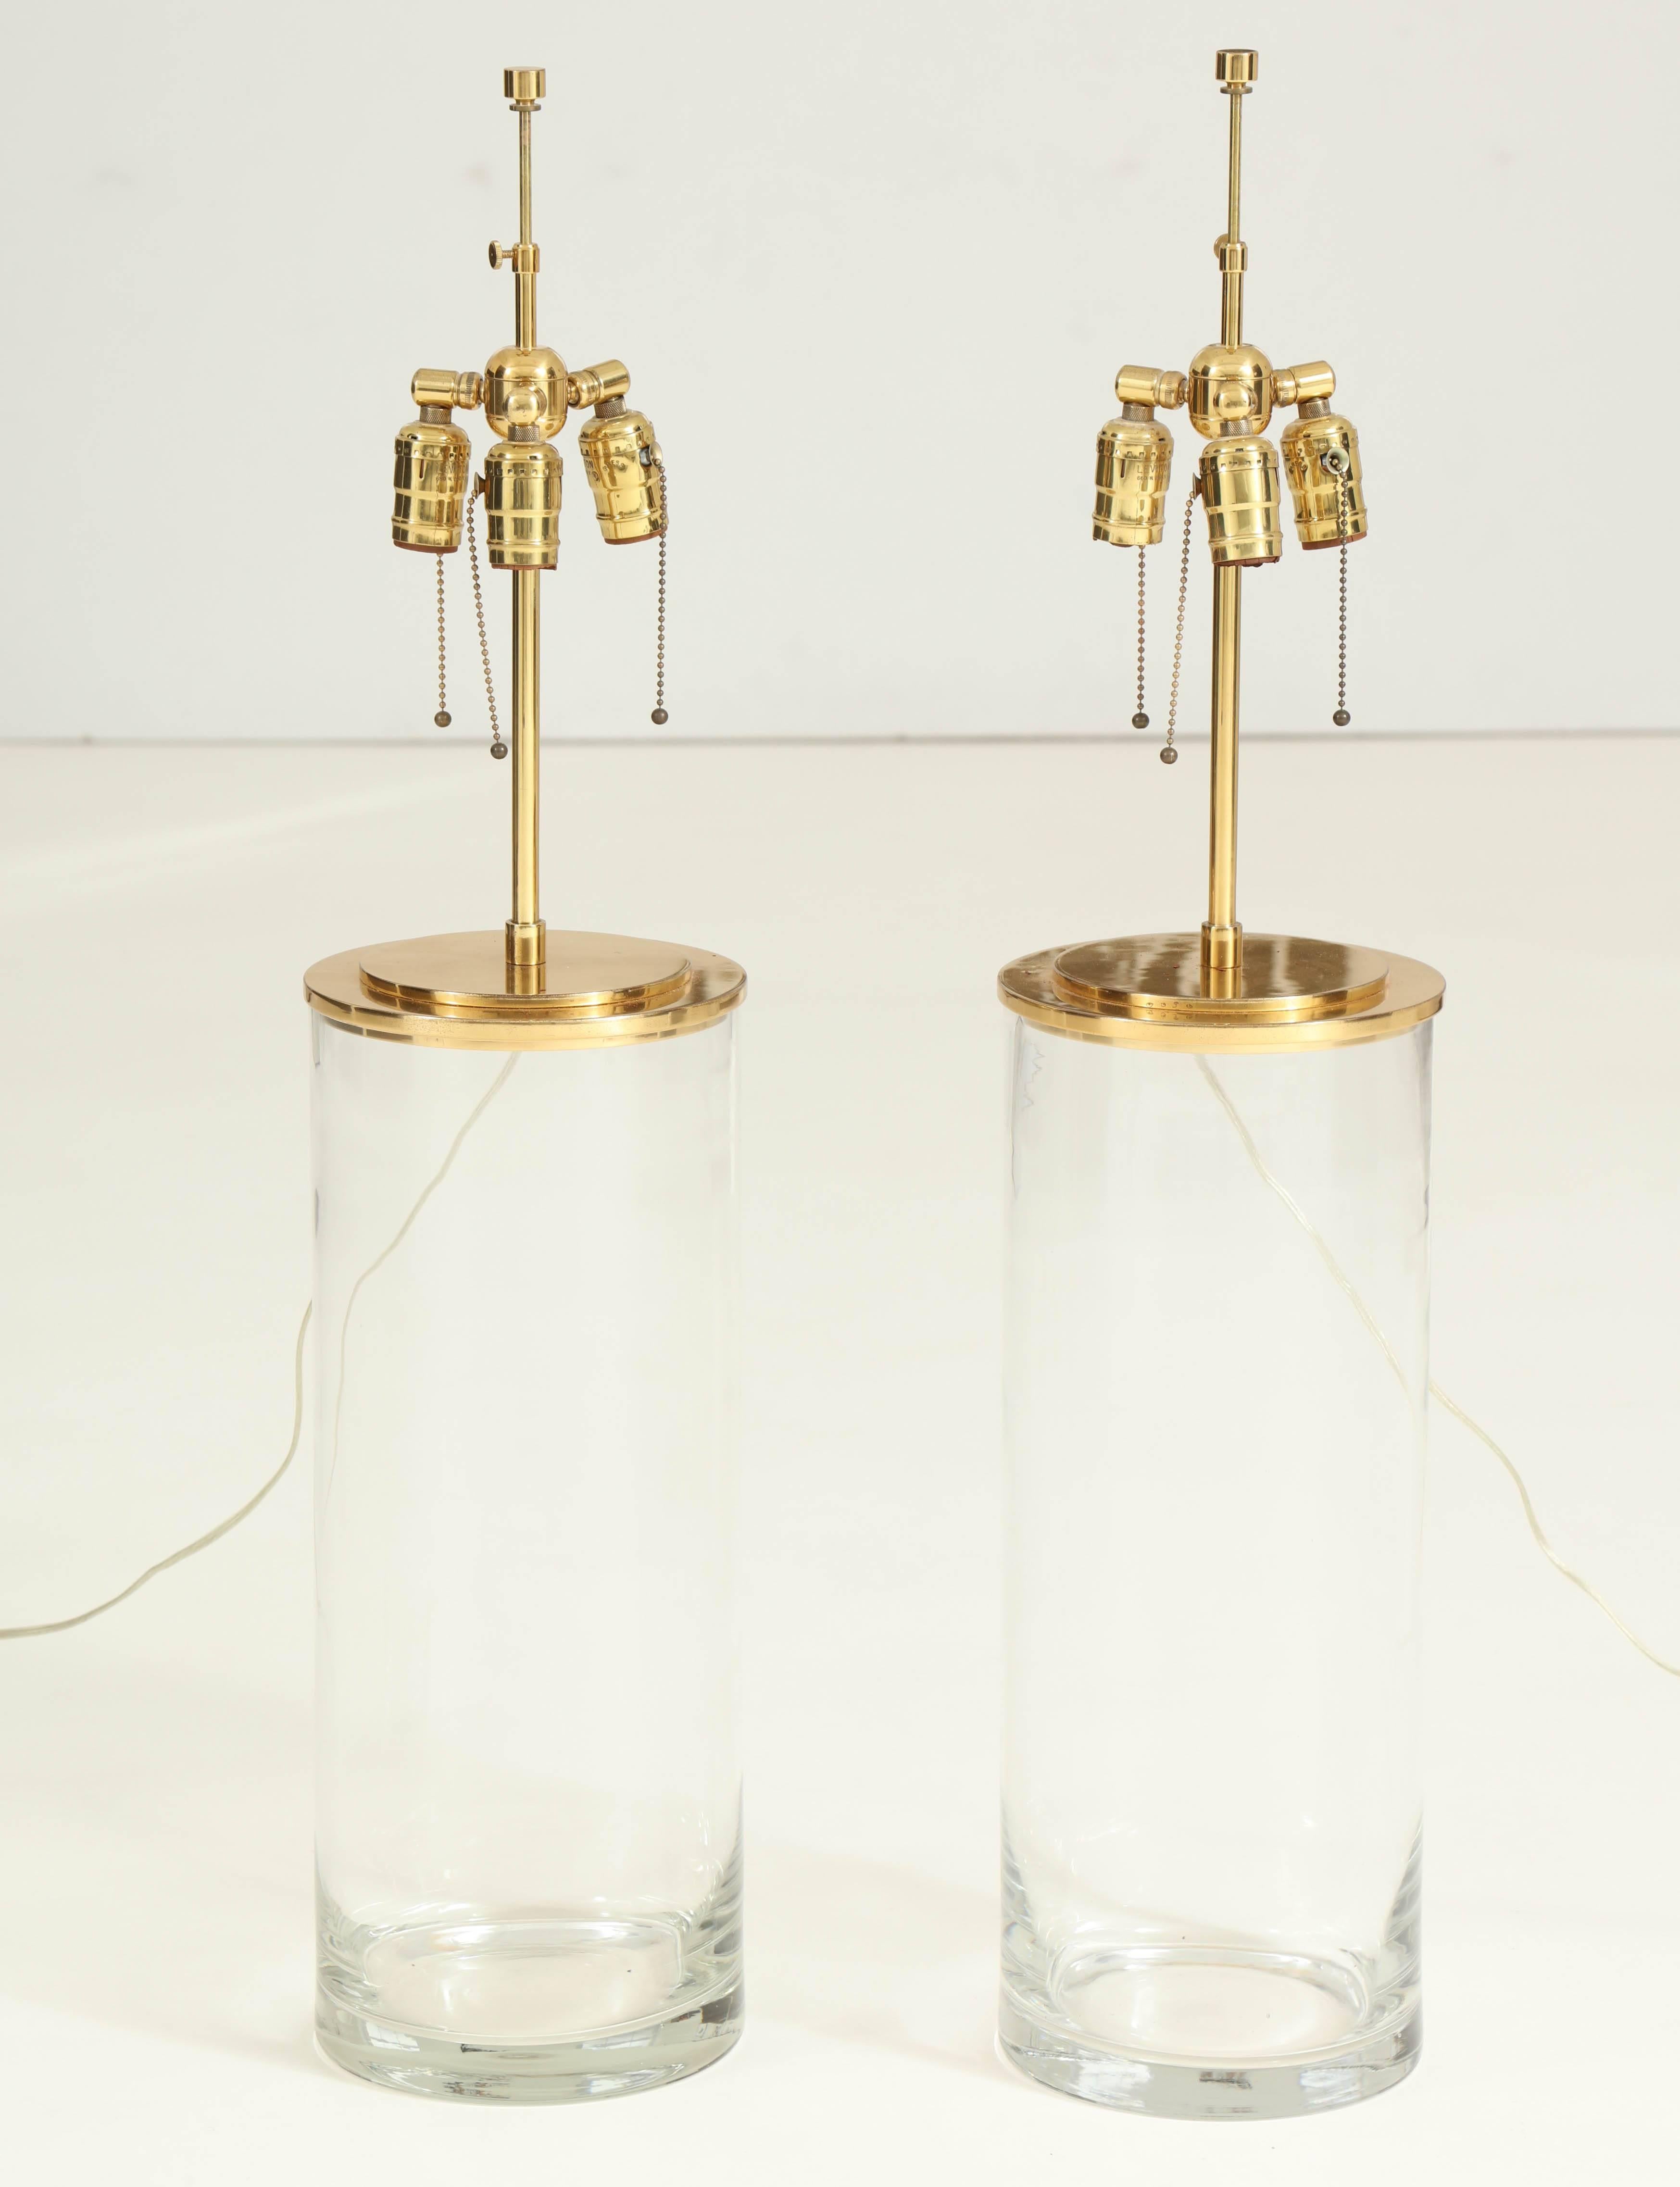 Large chic pair of Minimalist blown glass and brass lamps designed by Harry Hinson for Hansen lamps in the late 1970s. Lamps feature triple socket hardware, and retain their original opaque white paper lamp shades.